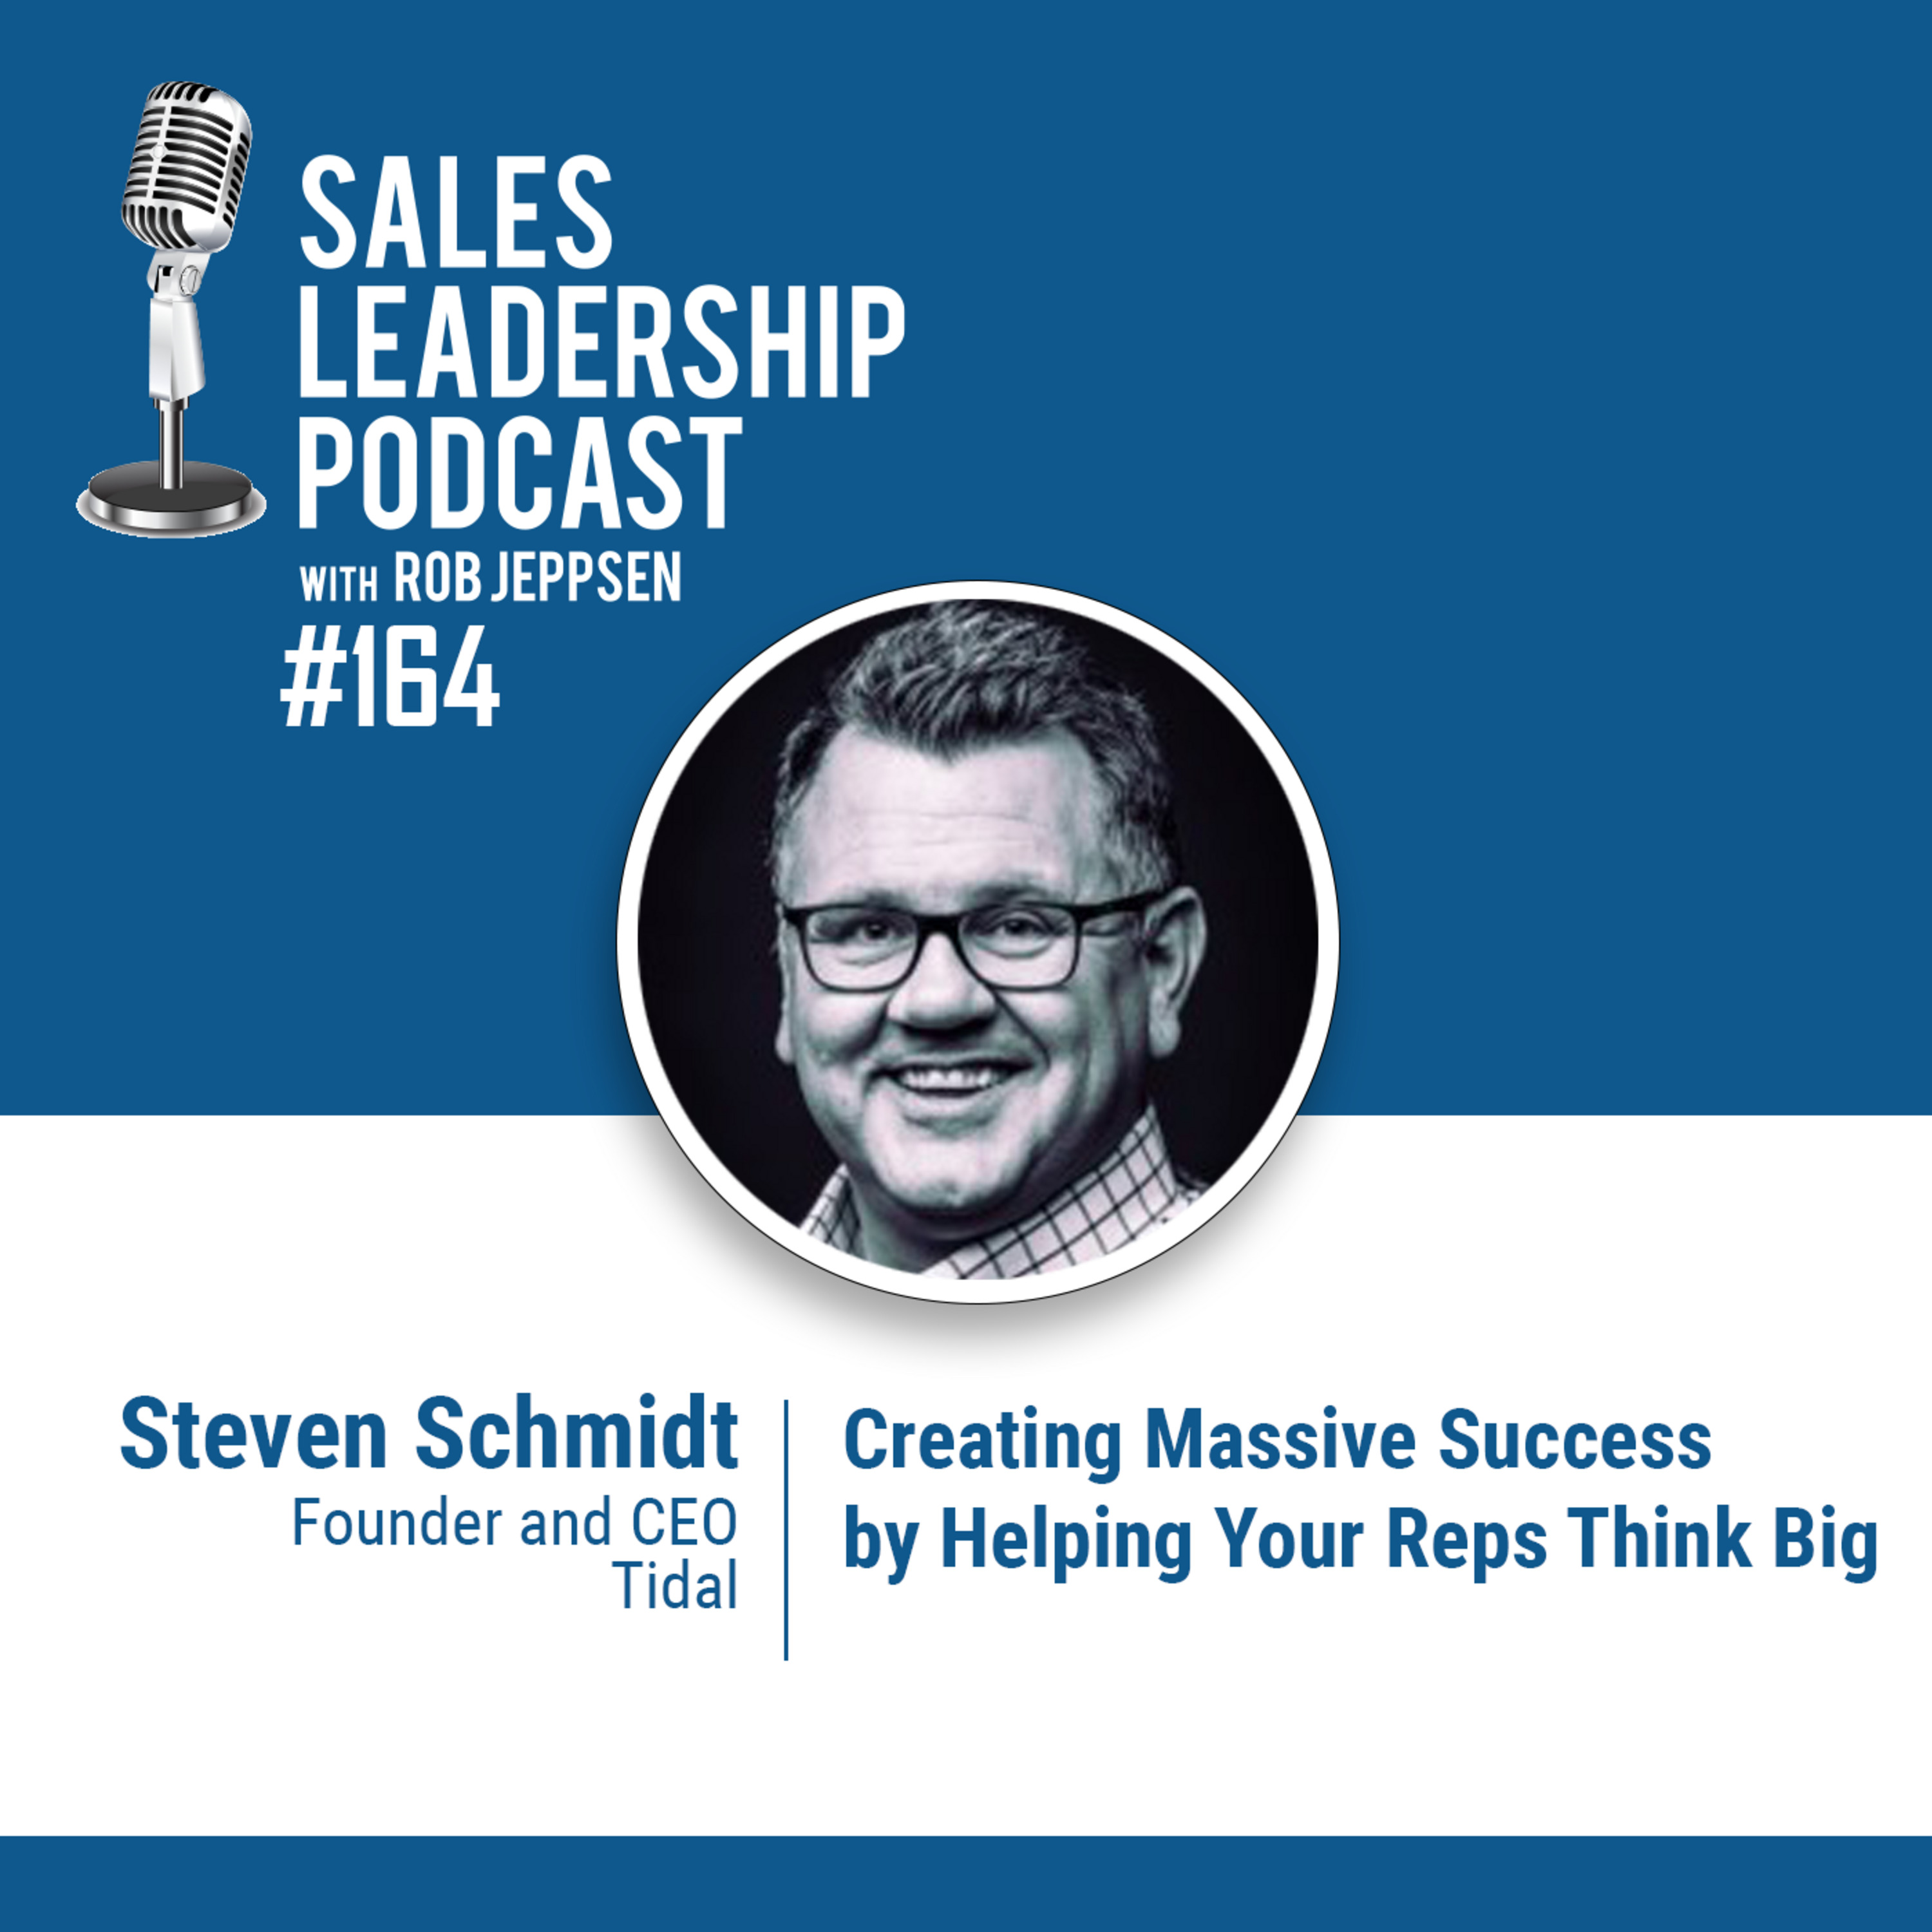 Episode 165: #164: Steven Schmidt of Tidal — Creating Massive Success by Helping Your Reps Think Big